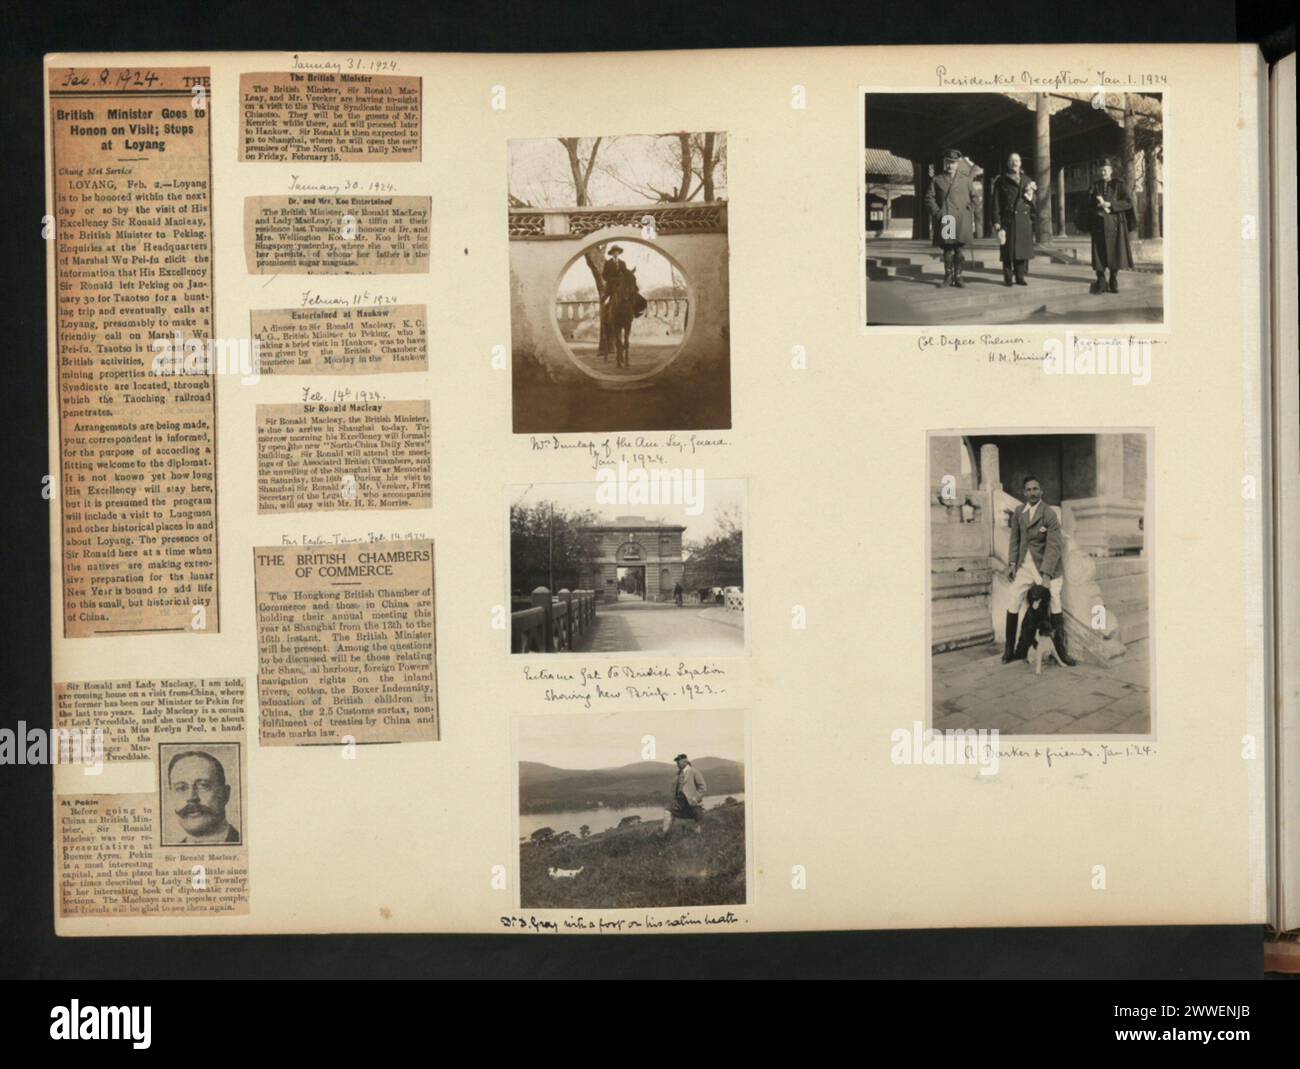 Description: Ronald Macleay's visits to Loyang, Hankow, Shanghai and other places. Newspaper clippings and photographs. Location: China Date: 1923-1926 china, asia, asiathroughalens Stock Photo